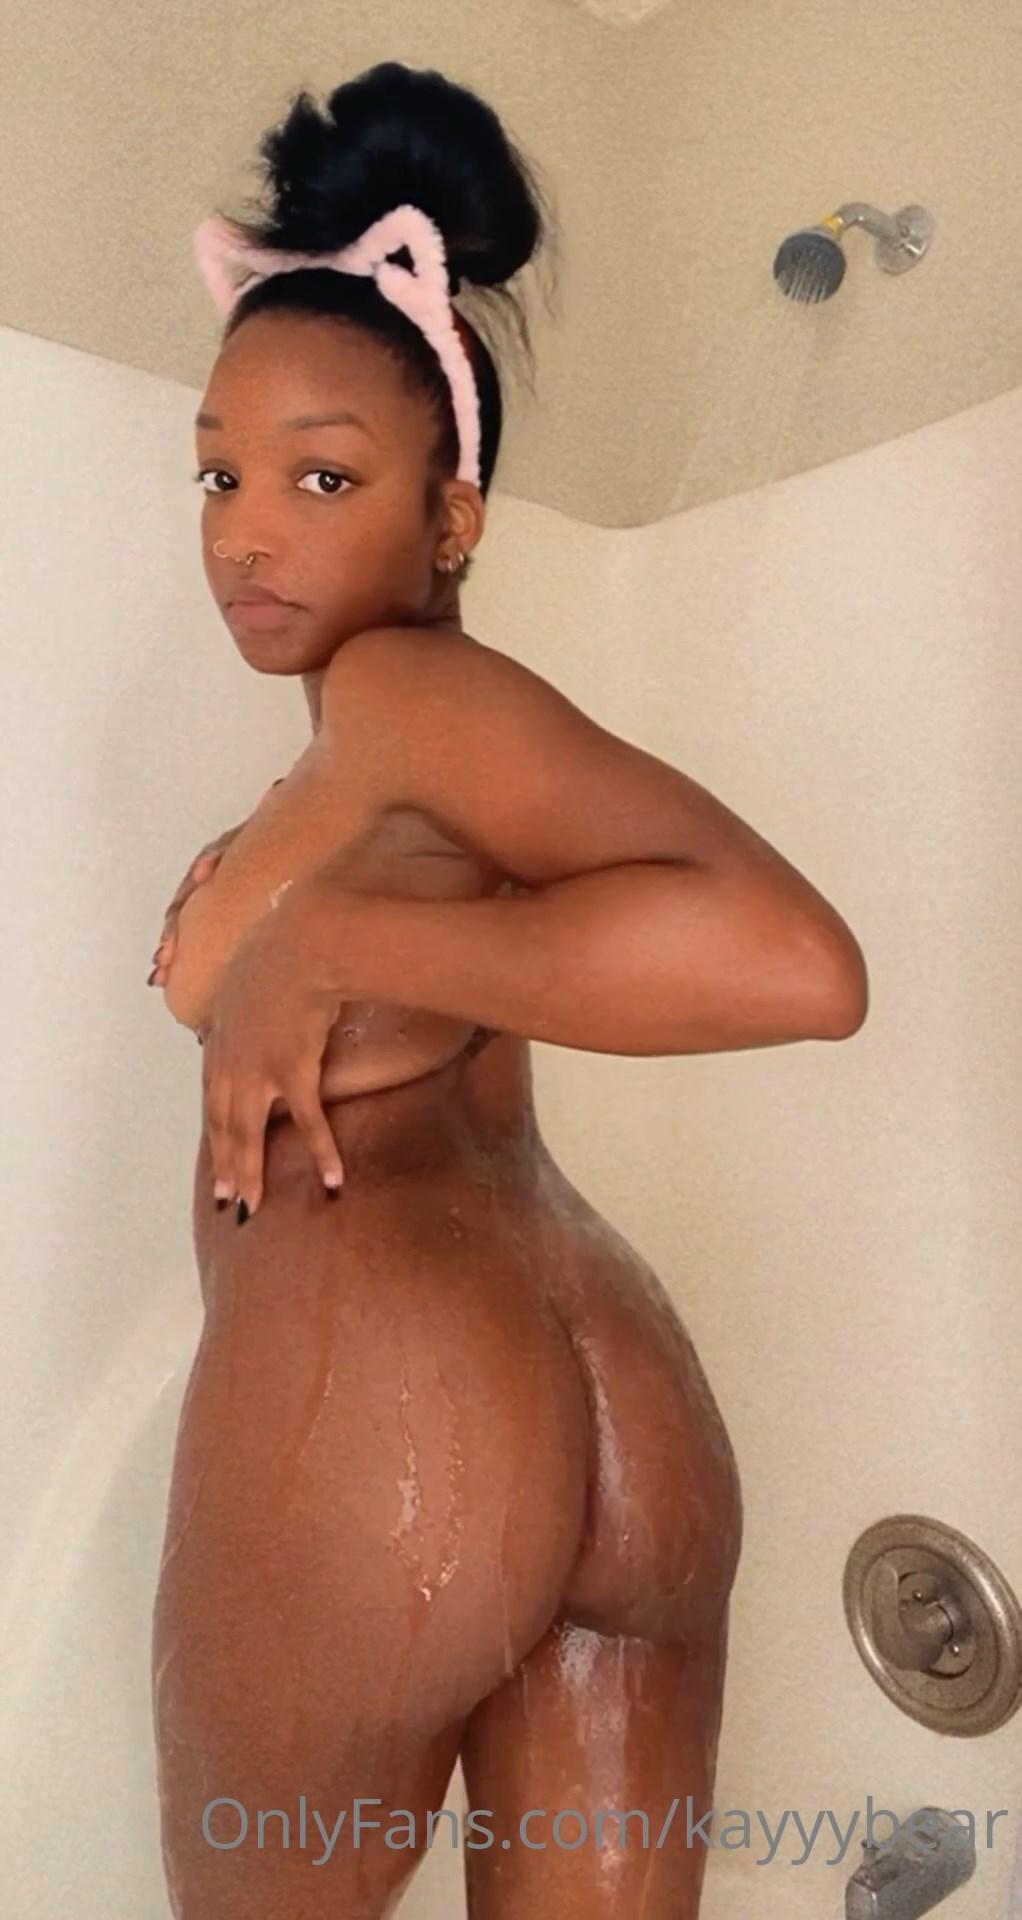 kayyybear nude shower onlyfans video leaked QSDLED